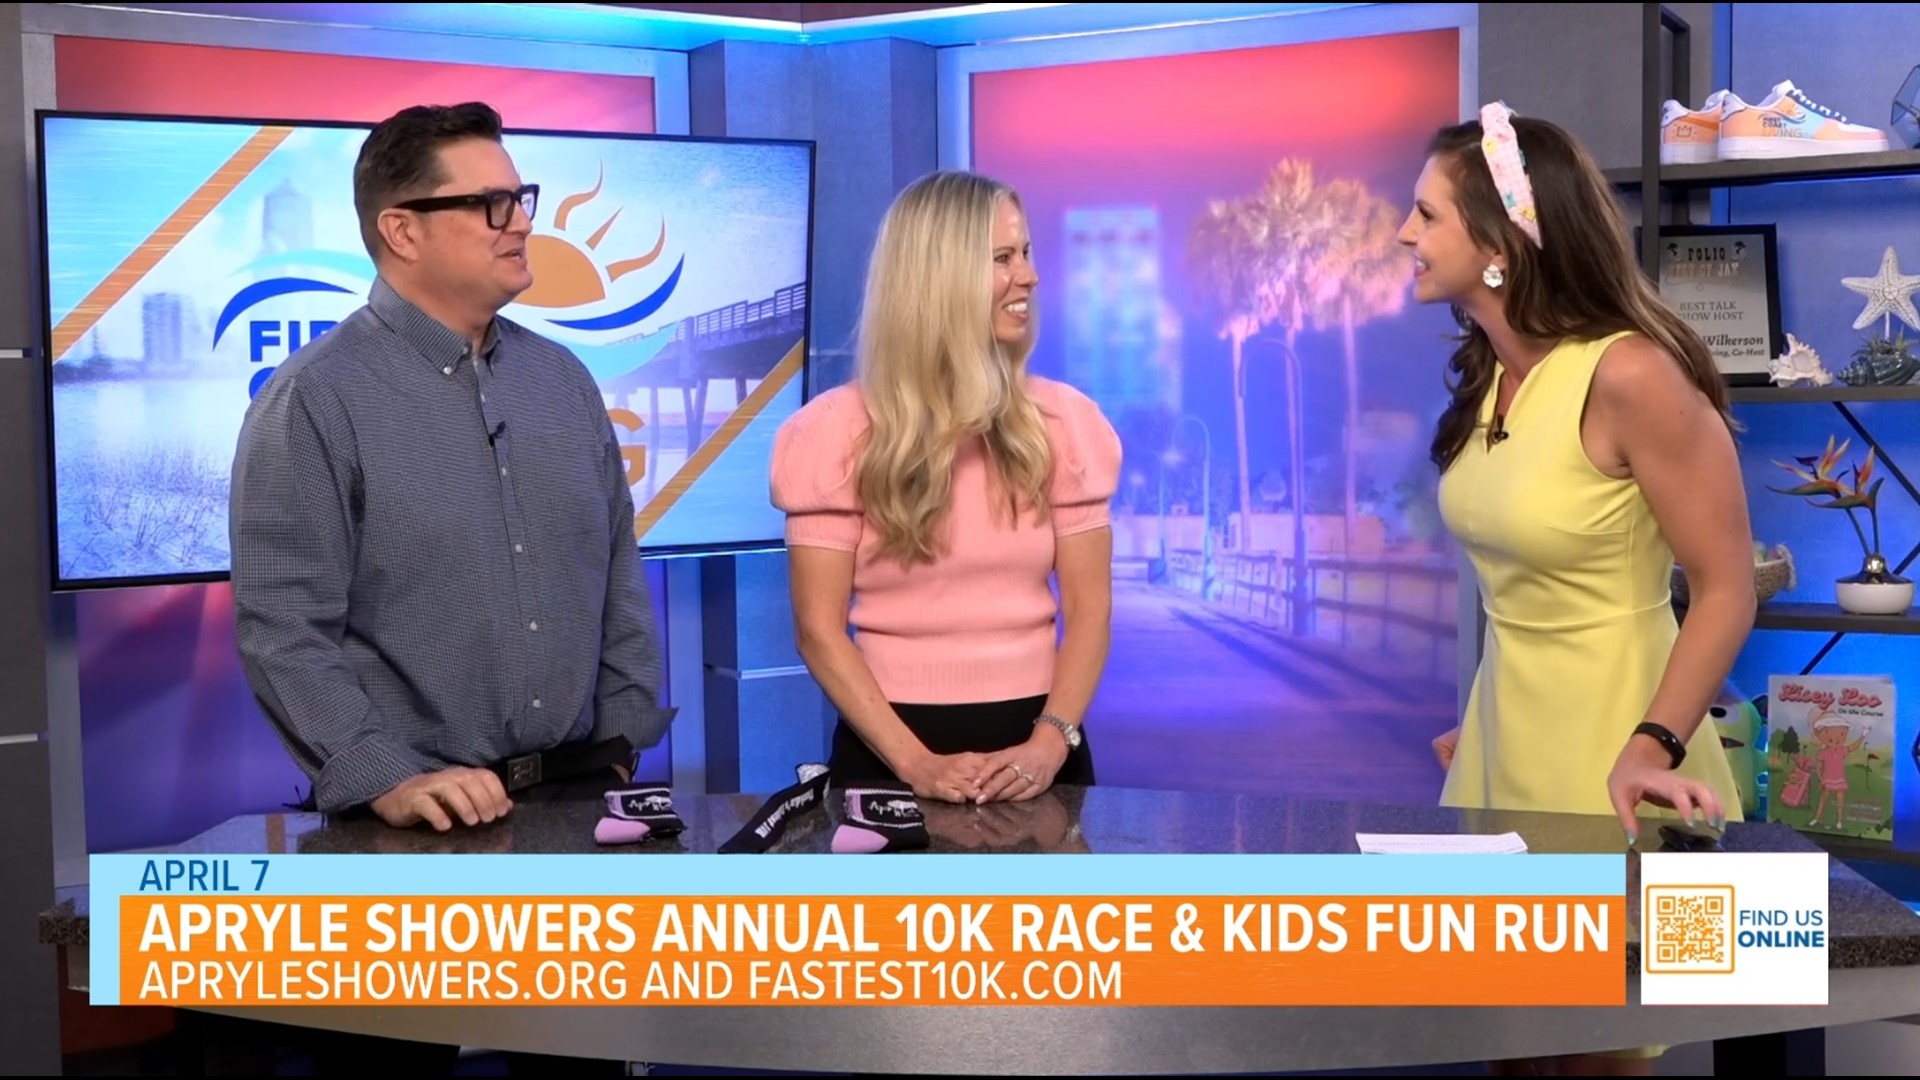 The Apryle Showers 10K race and fun run will be on April 7th in Nocatee.